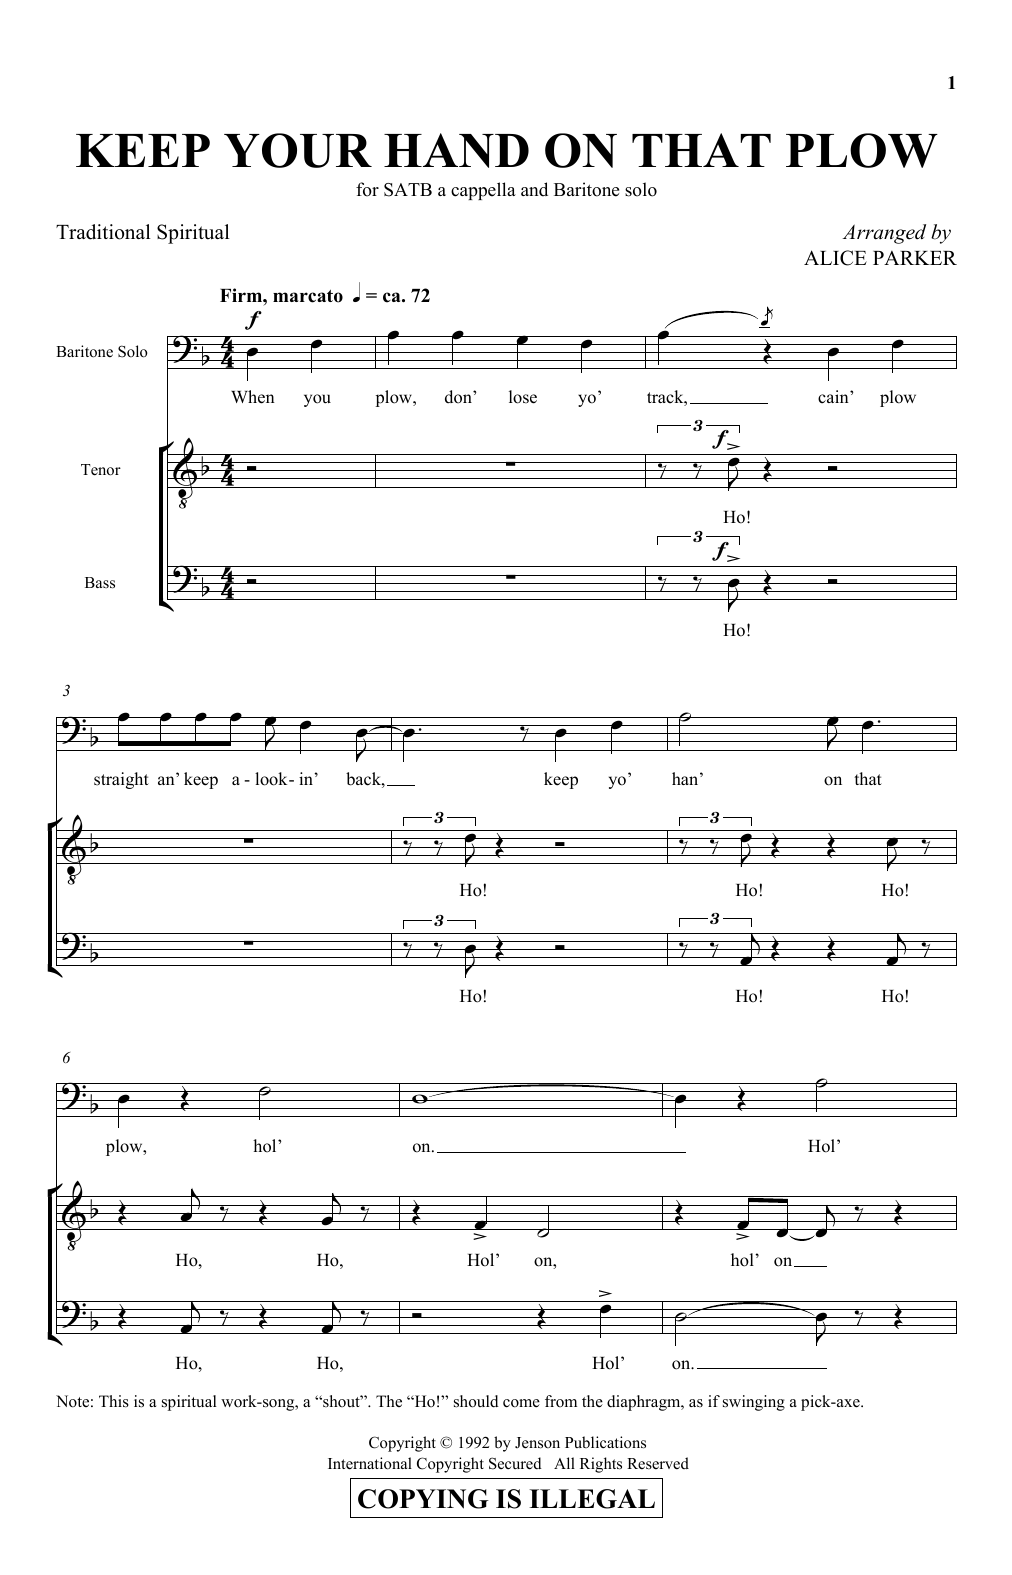 Download Alice Parker Keep Your Hand On That Plow Sheet Music